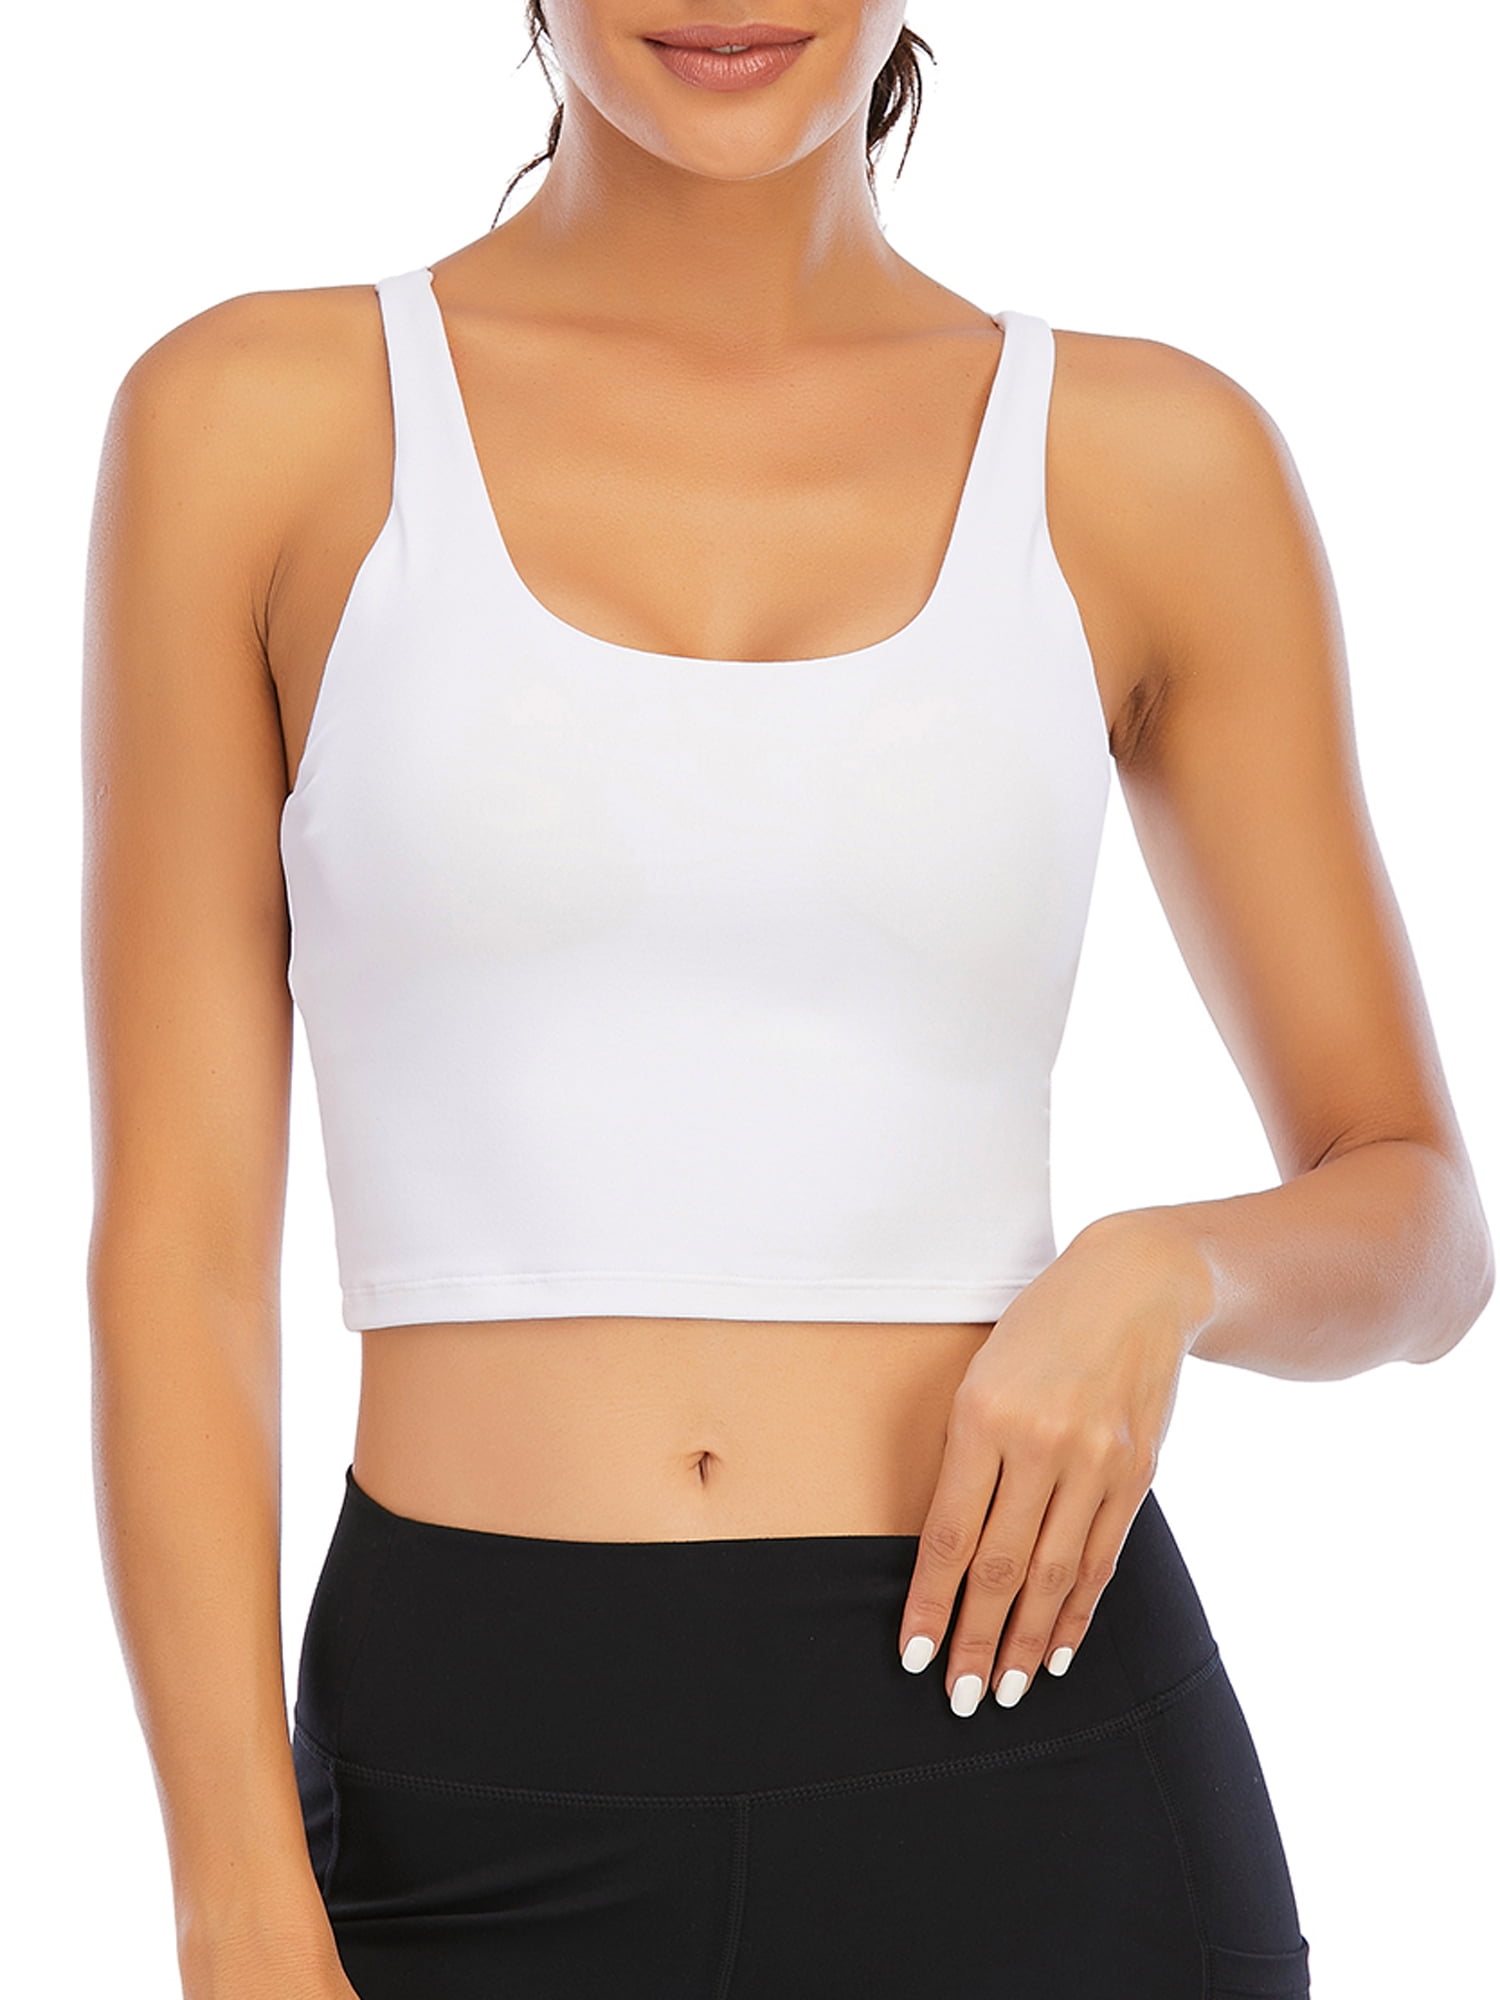 Black Fitted Crop Tank Top Women Built in Bra Funny Exercise Tanks